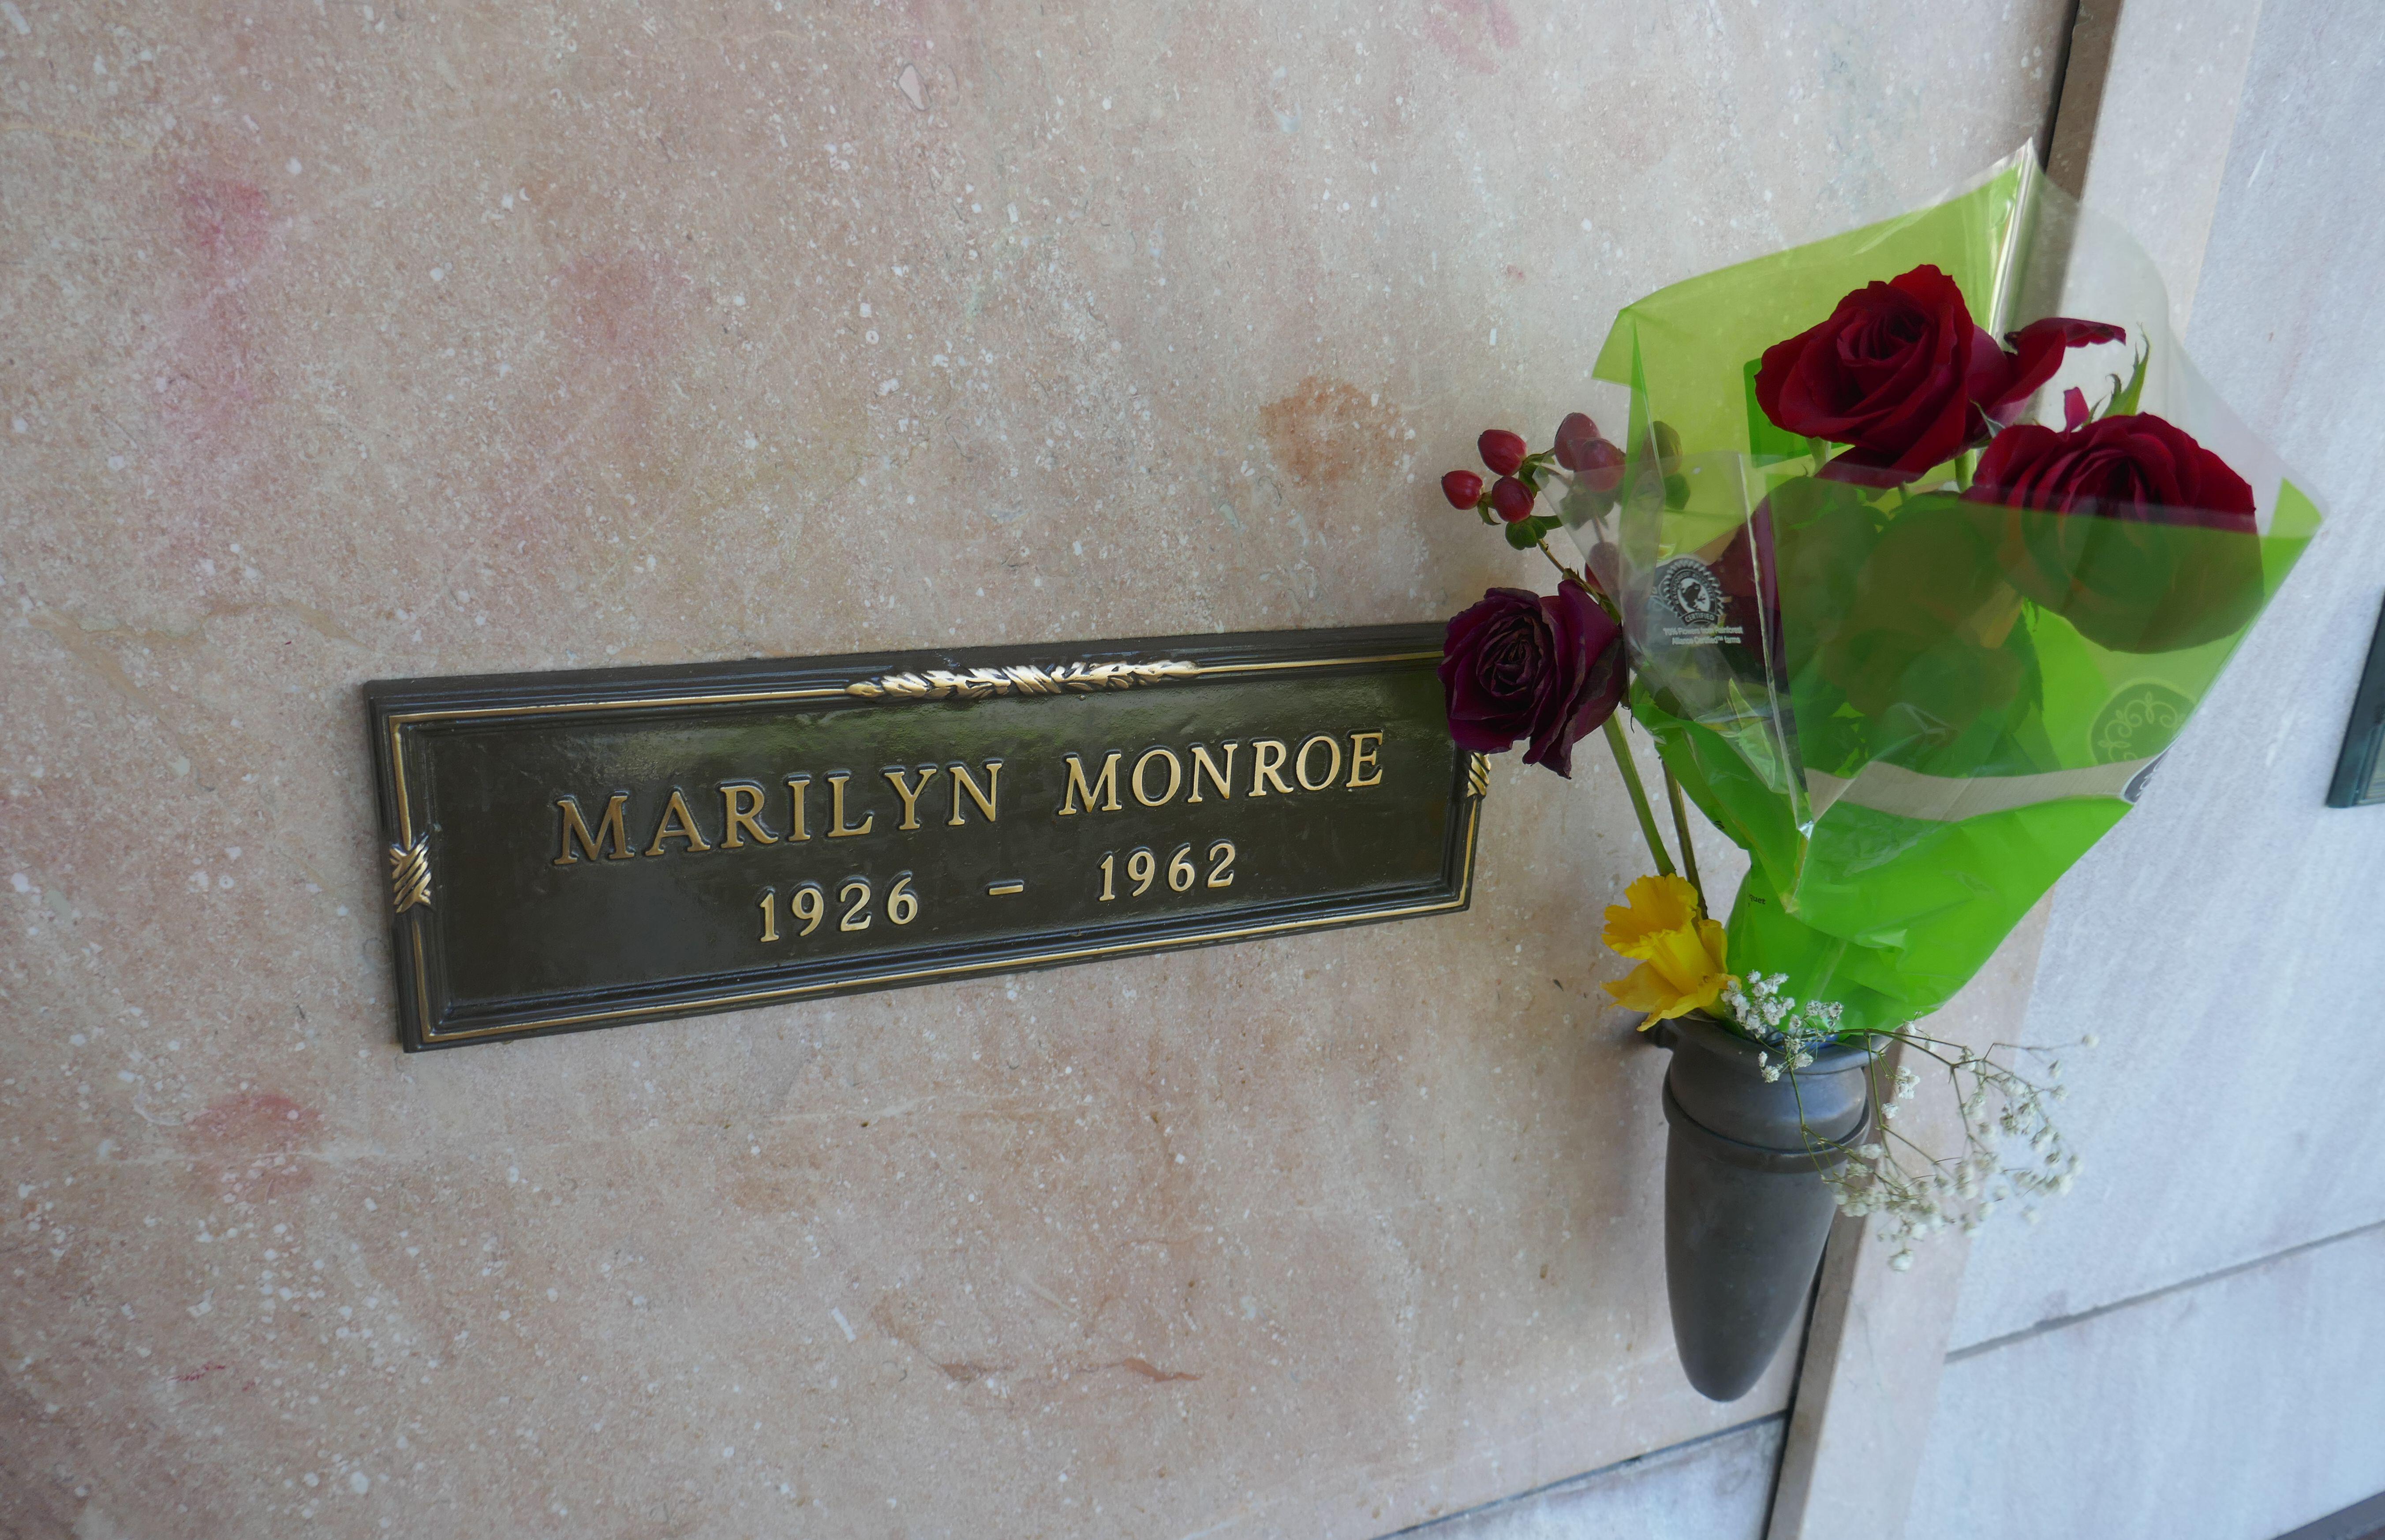 Ana de Armas Visited Marilyn Monroe's Grave Before Blonde to Ask